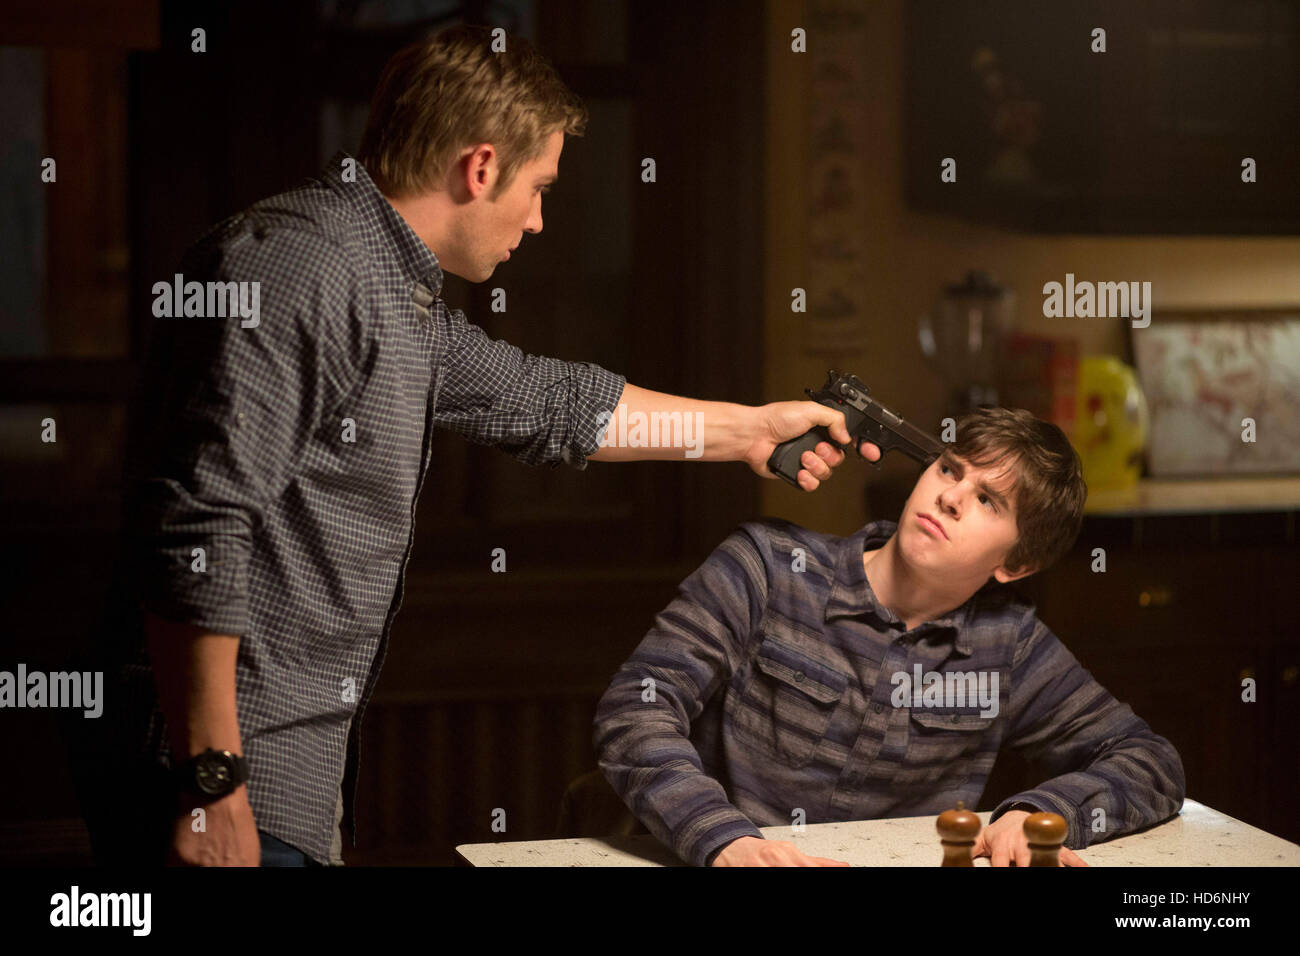 BATES MOTEL, l-r: Mike Vogel, Freddie Highmore in 'The Truth' (Season 1,  Episode 6, aired April 22, 2013), 2013-, ph: Joseph Stock Photo - Alamy